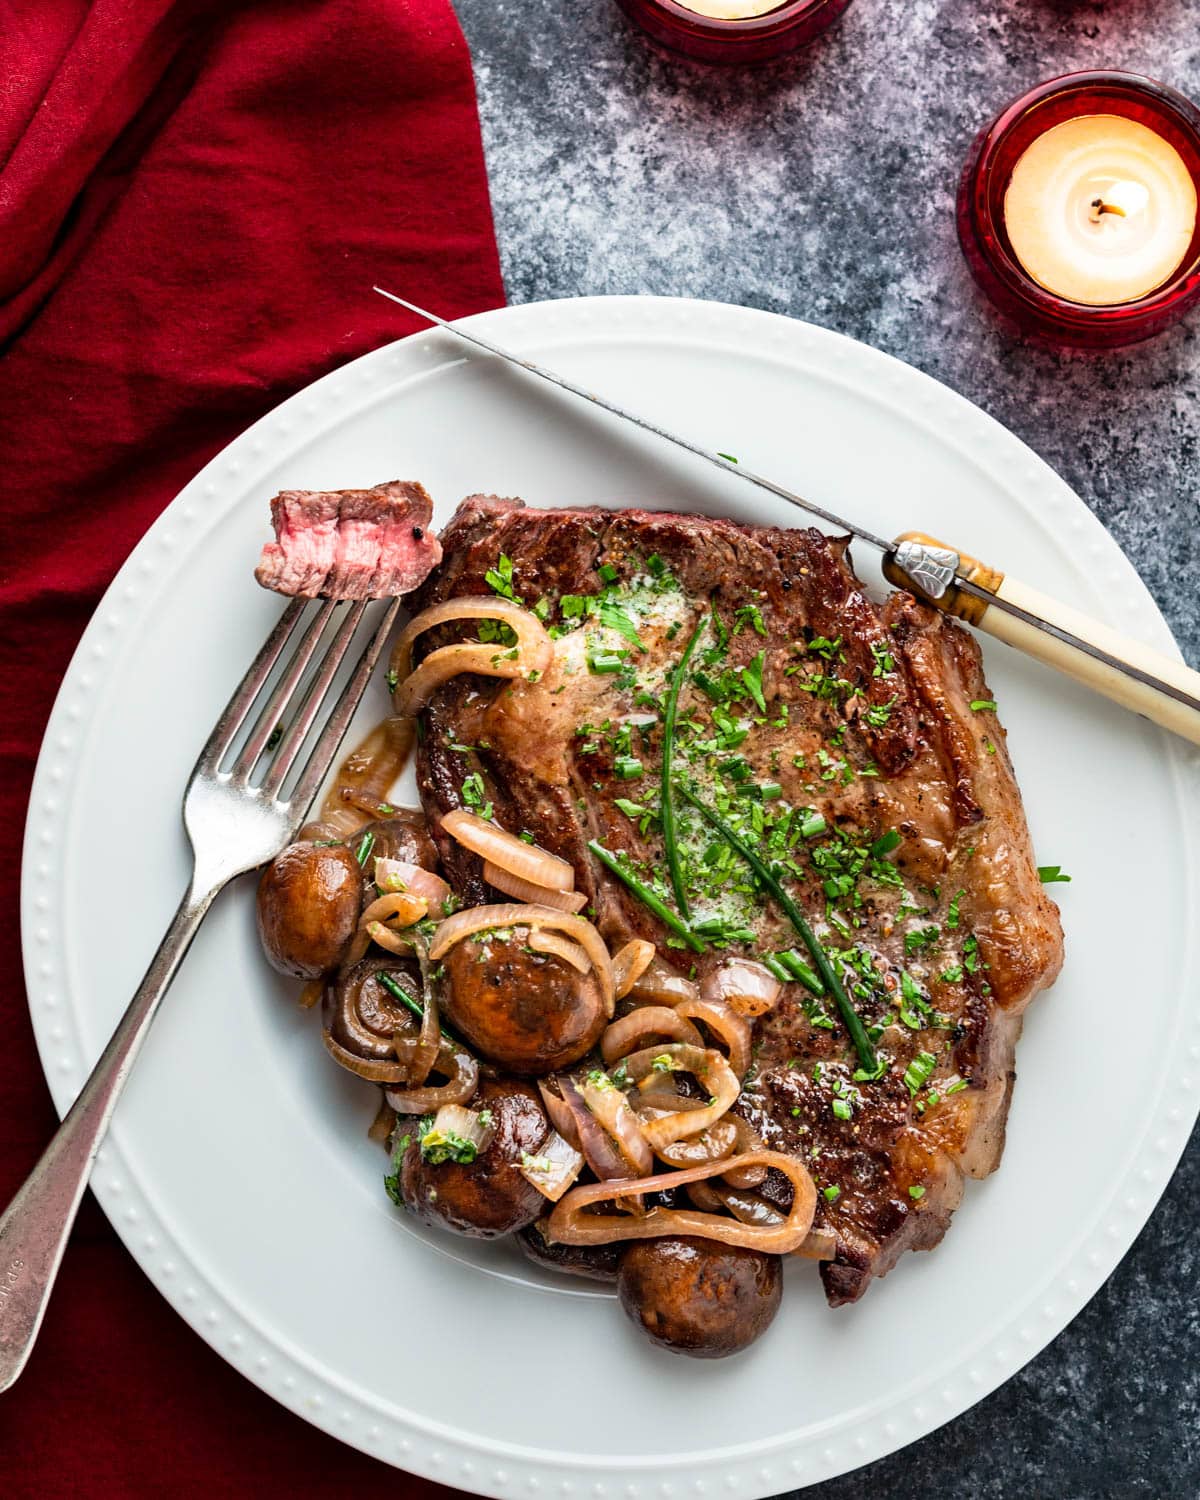 A perfectly cooked steak with mushrooms and onions on a plate.